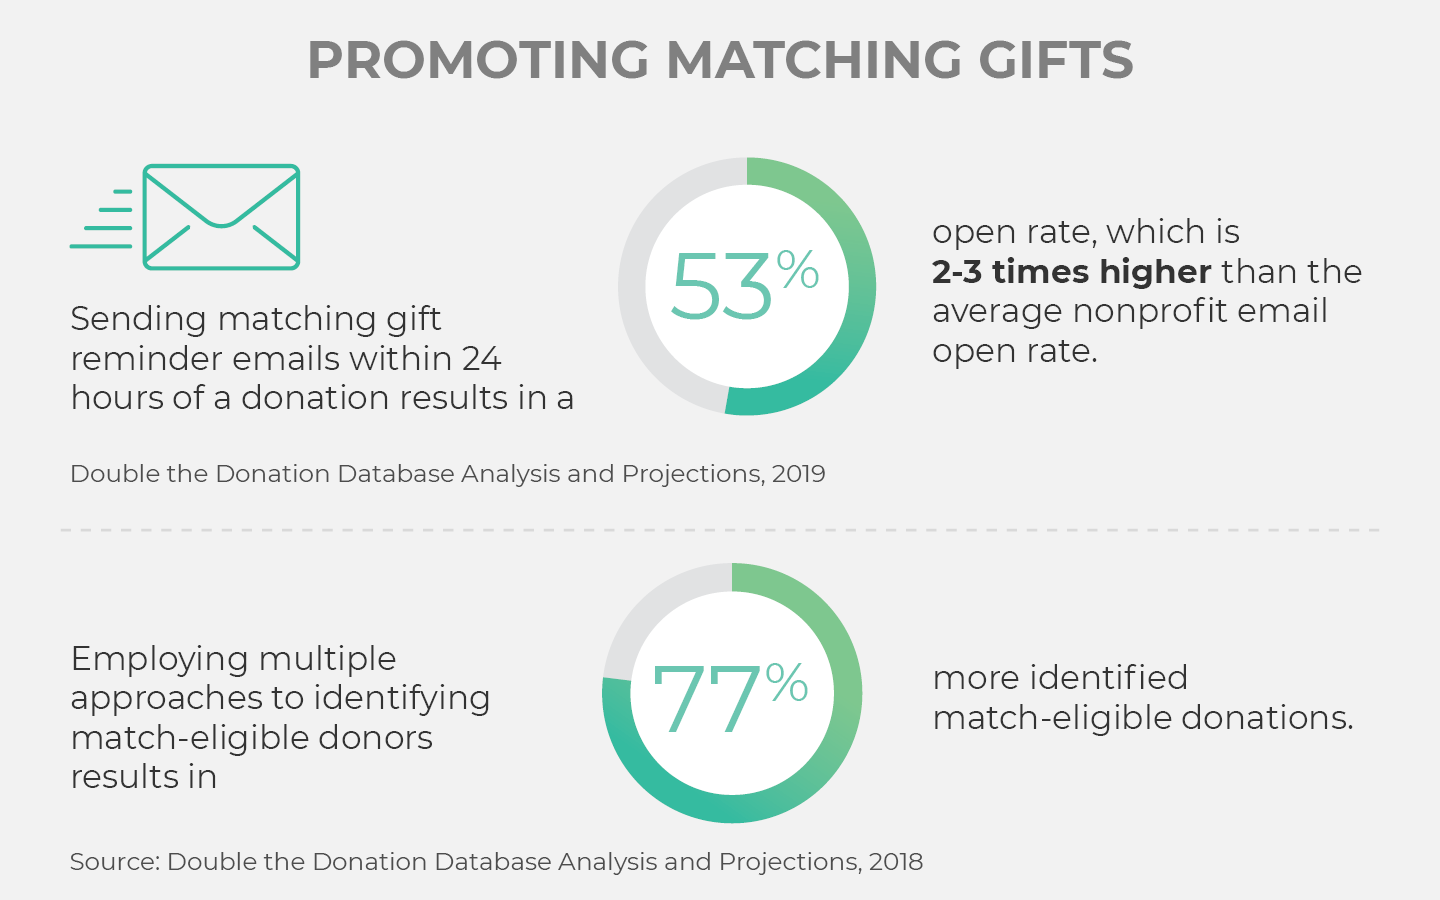 Matching gift buy-in statistic: Sending matching gift reminder emails within 24 hours of a donation results in a 53% open rate, and using multiple approaches to identify match-eligible donors results in 77% more identified match-eligible donations.